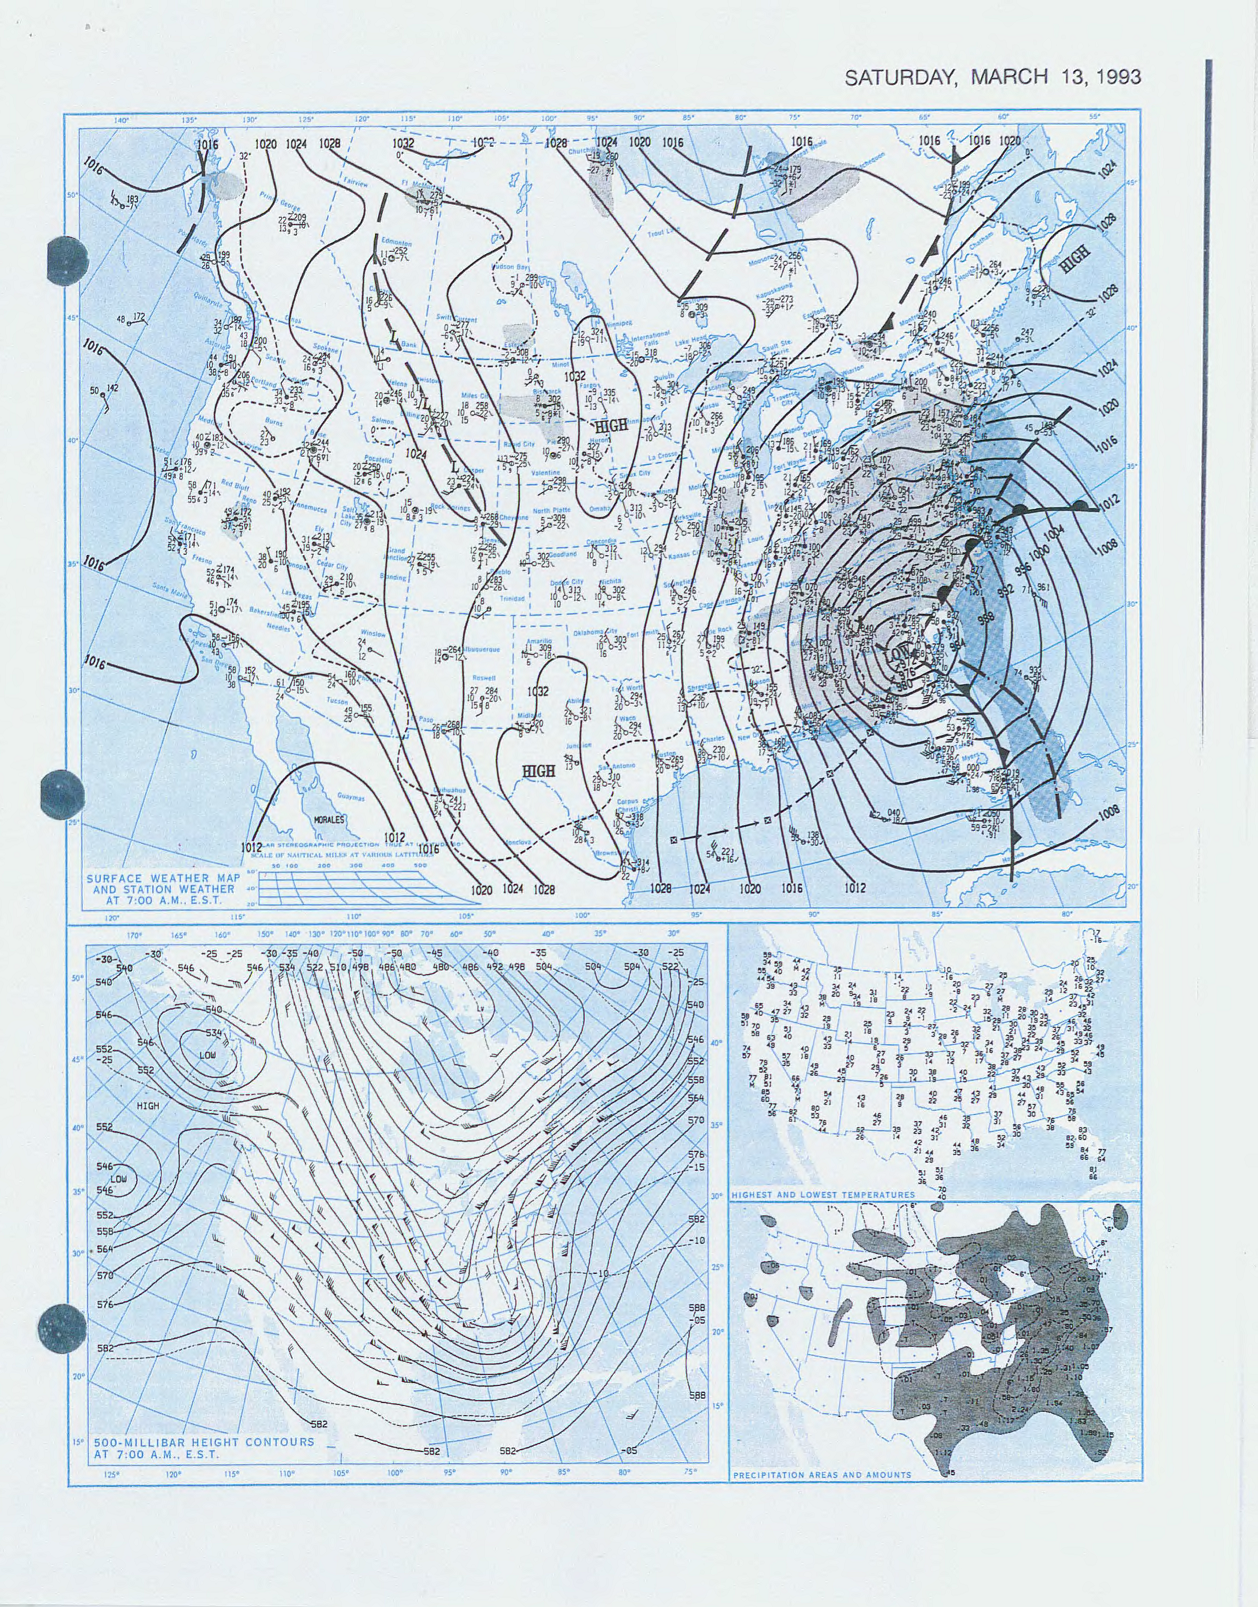 Daily Weather Map March 13, 1993